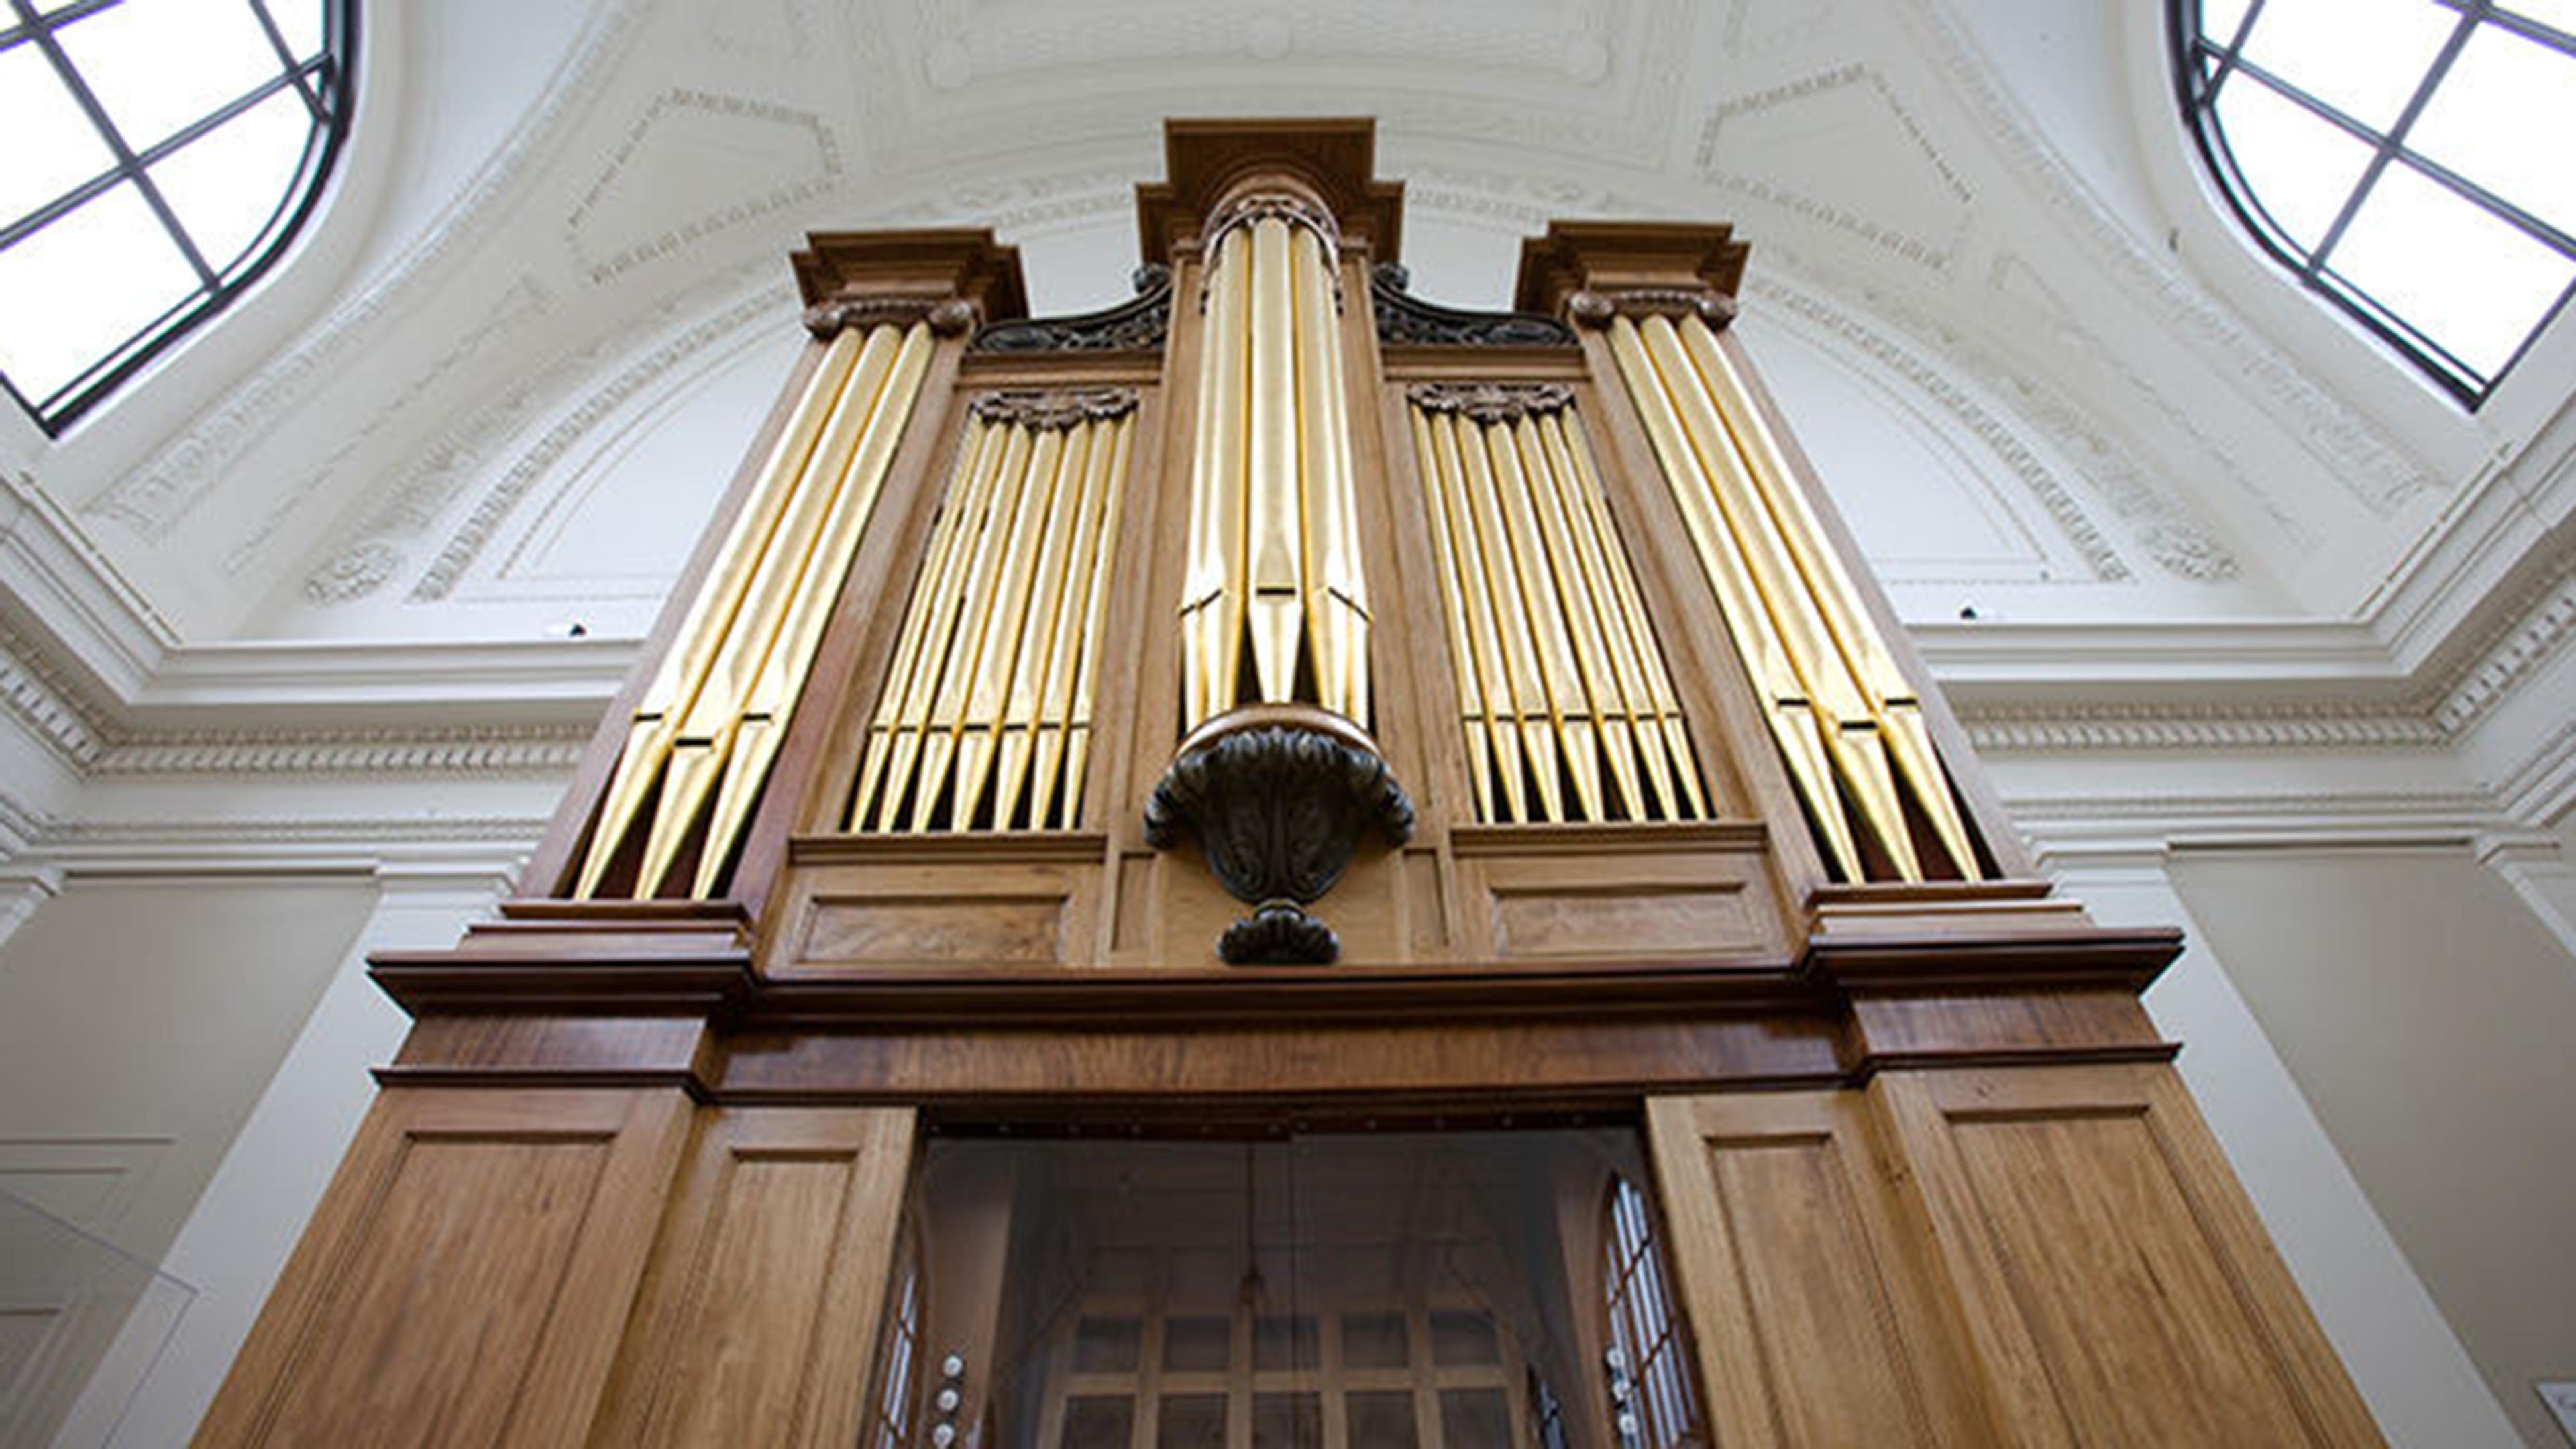 Large organ with gold pipes